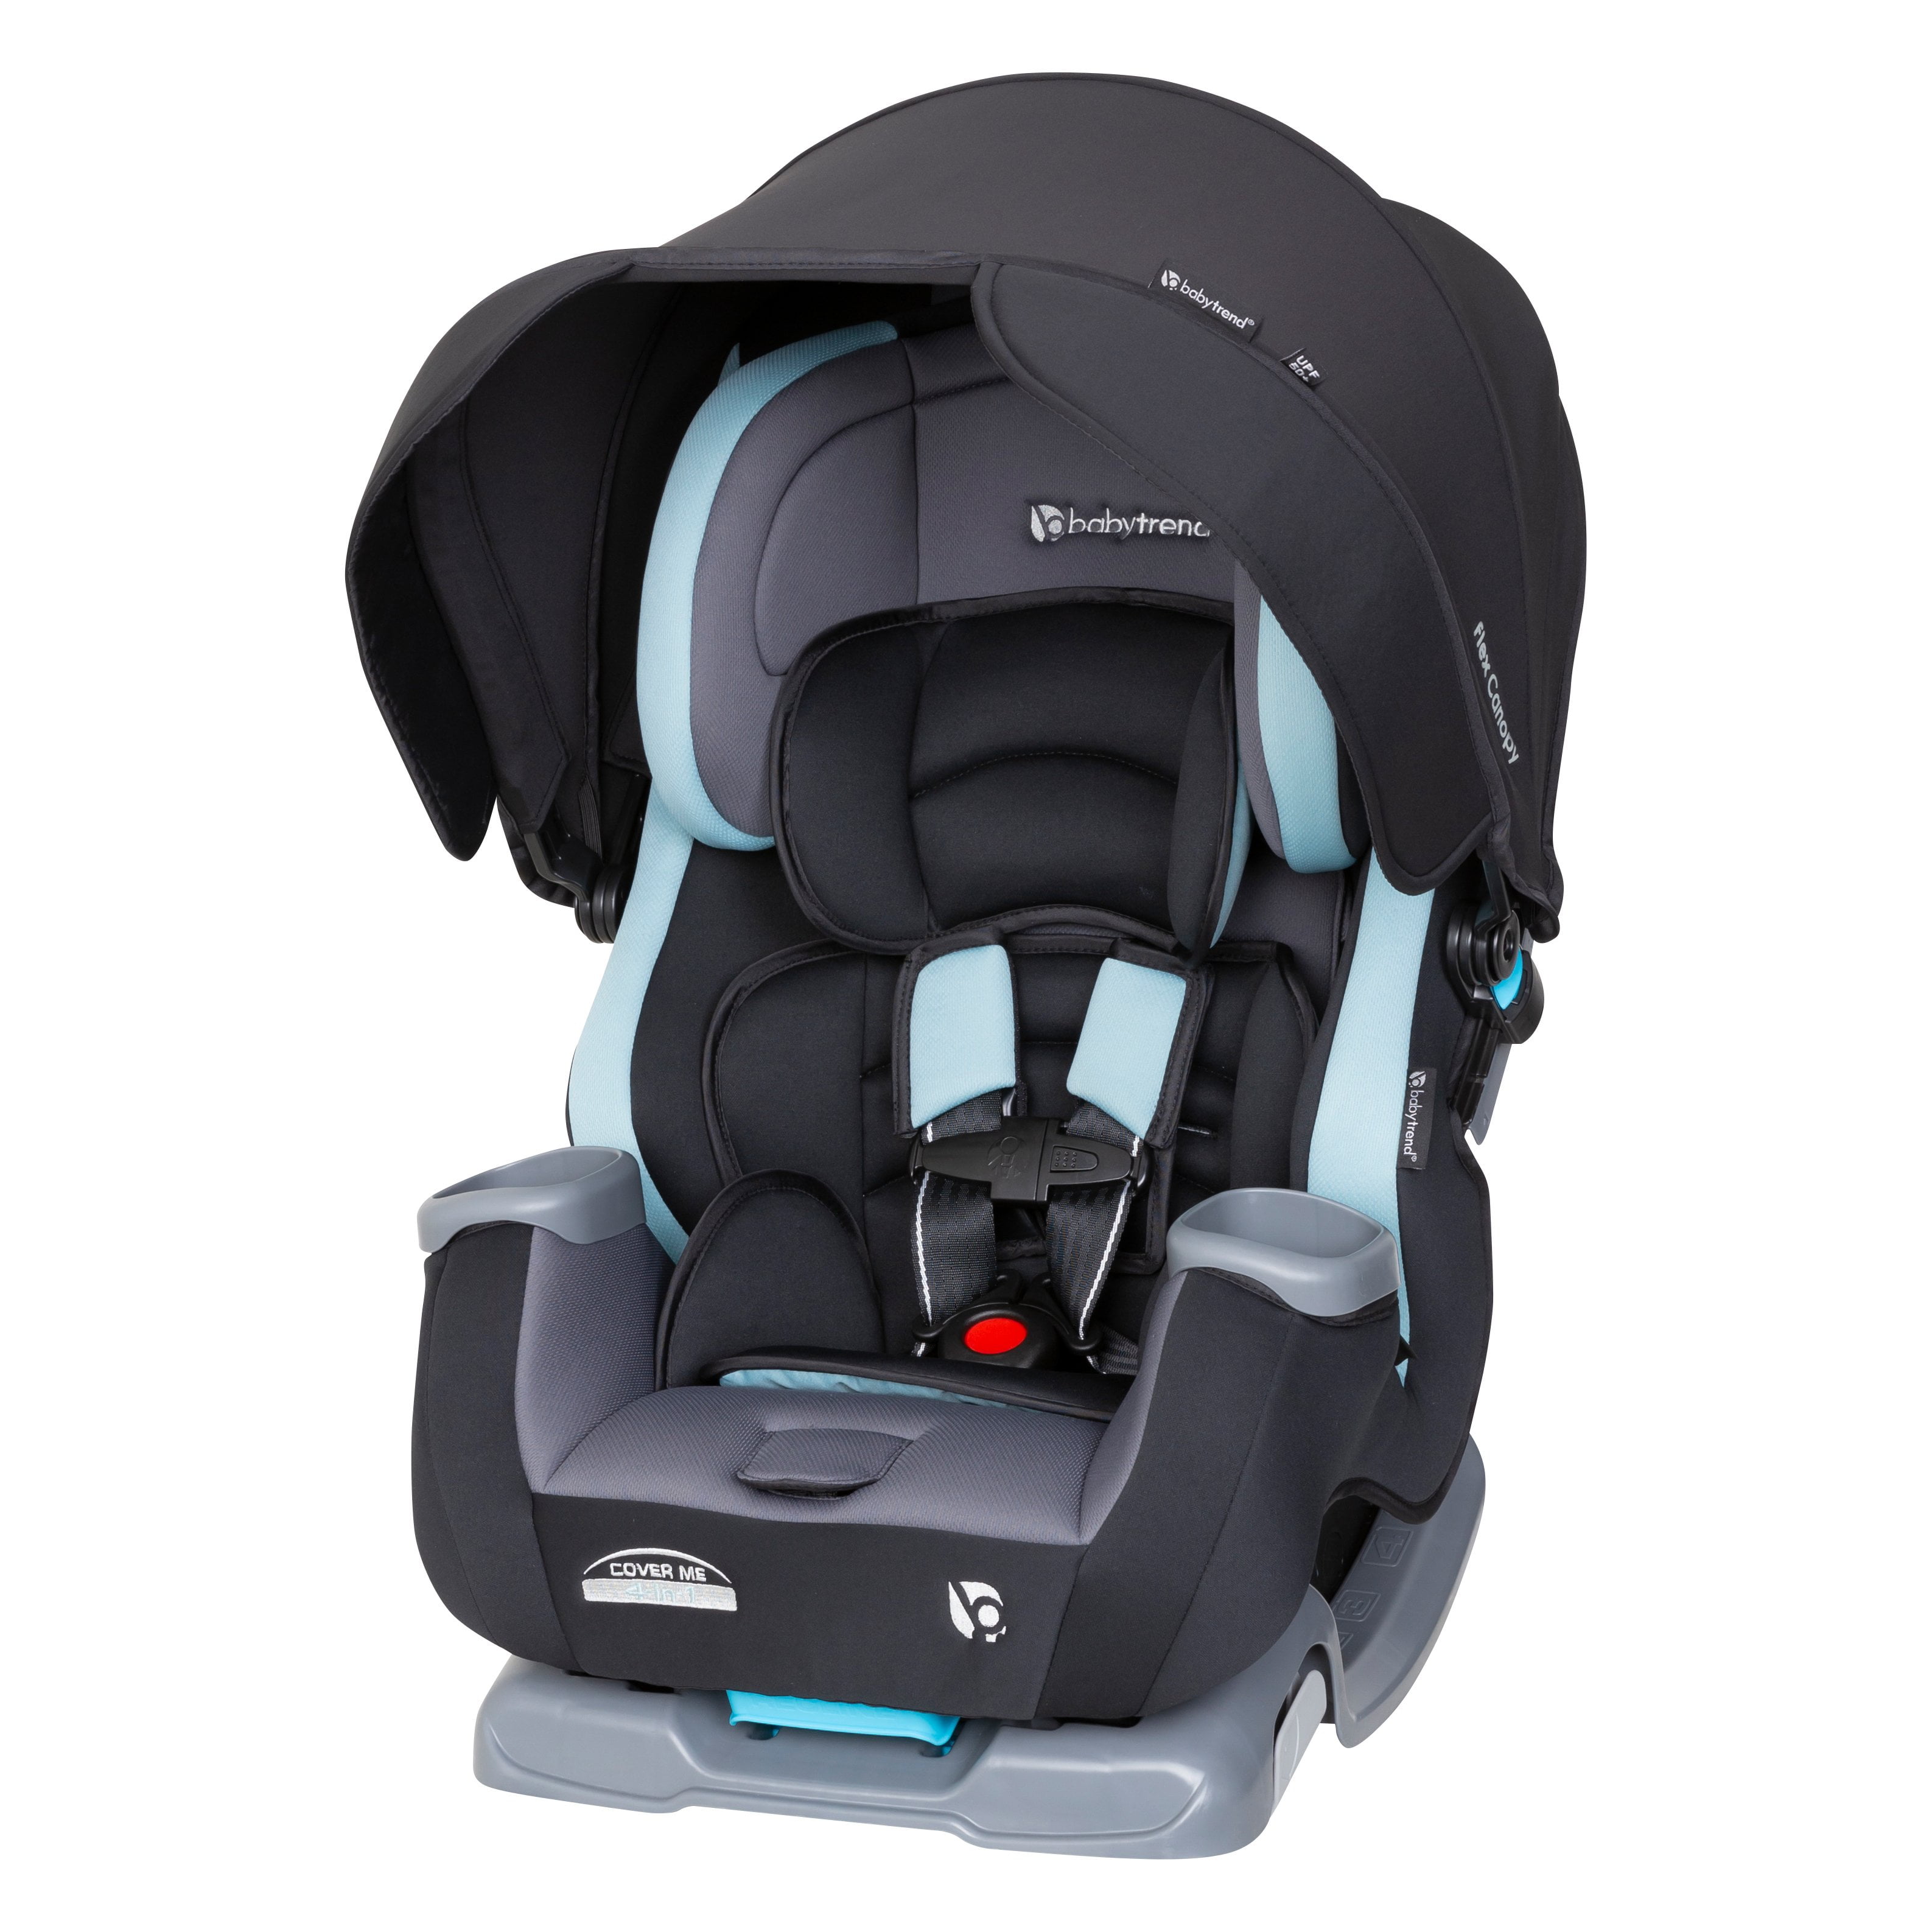 BABY TREND COVER ME 4in1 CONVERTIBLE CAR SEAT DESERT BLUE Walmart